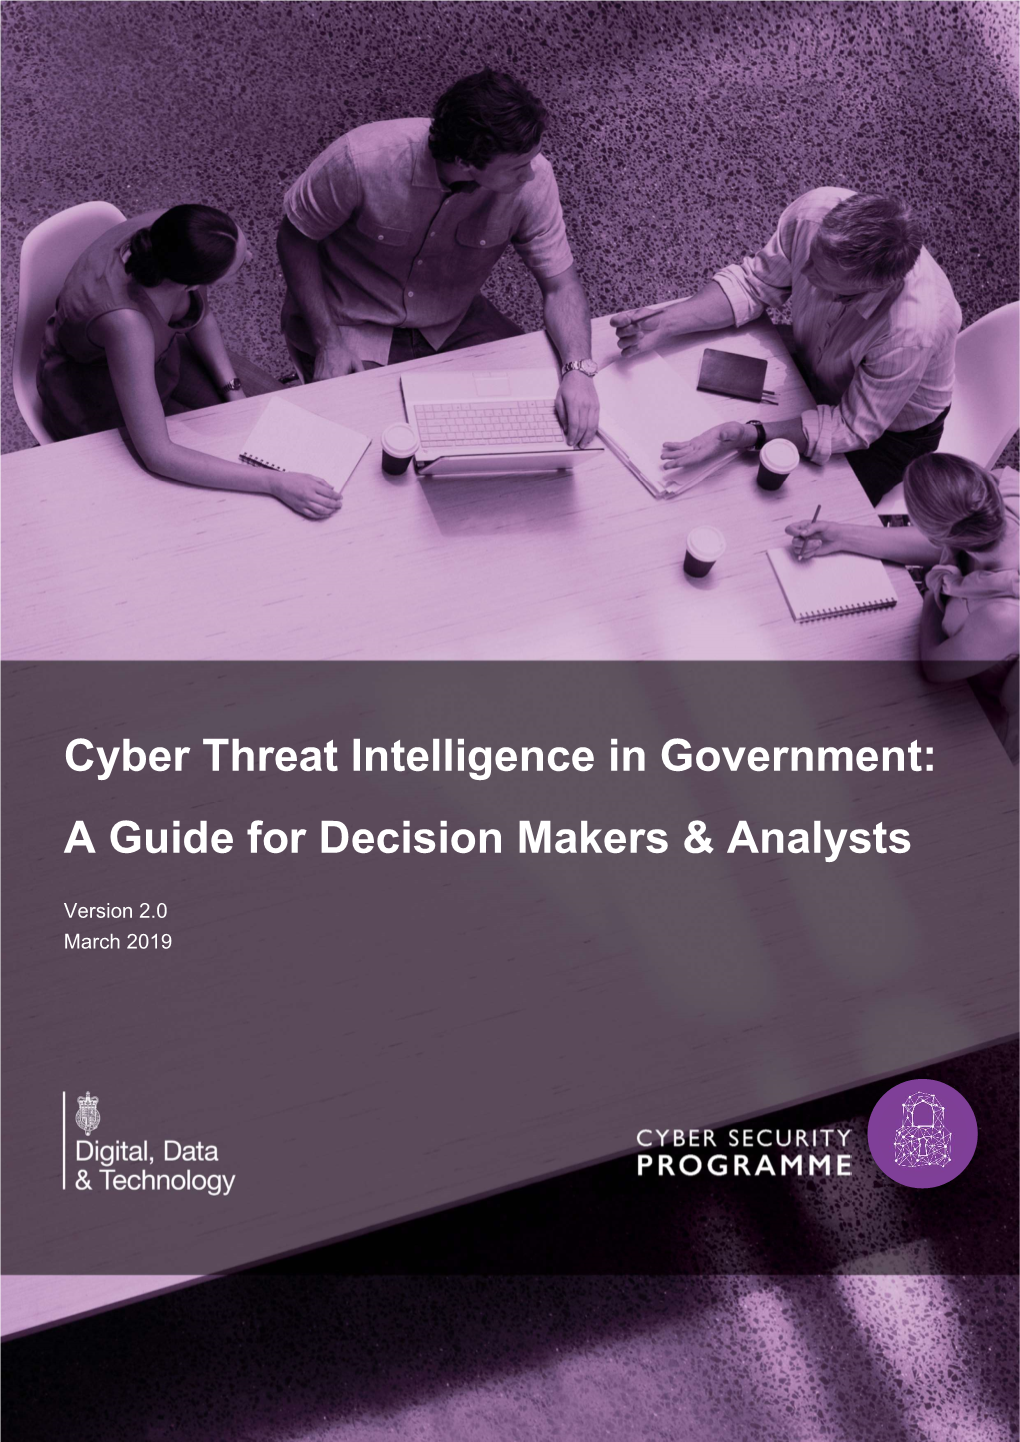 Cyber Threat Intelligence a Guide for Decision Makers and Analysts V2.0